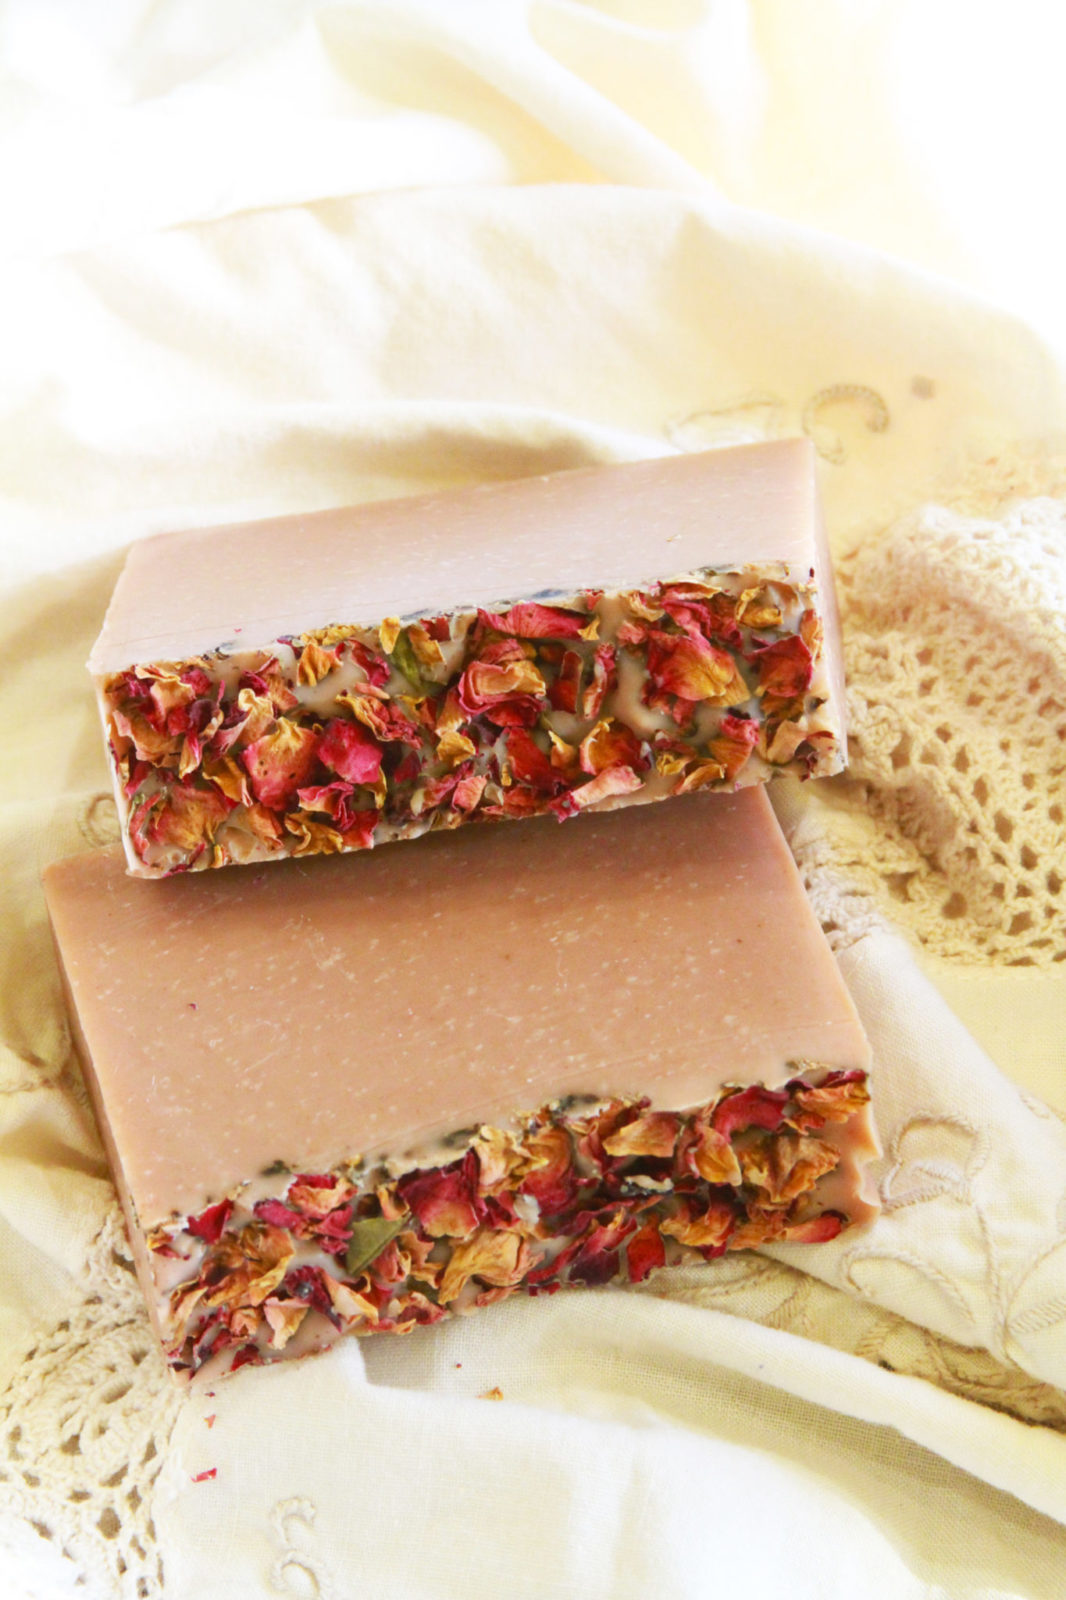 Valentines Day Limited Edition Soap by Old Factory with Patchouli, Frankincense, Benzoin and Rose Petals Blanco Texas